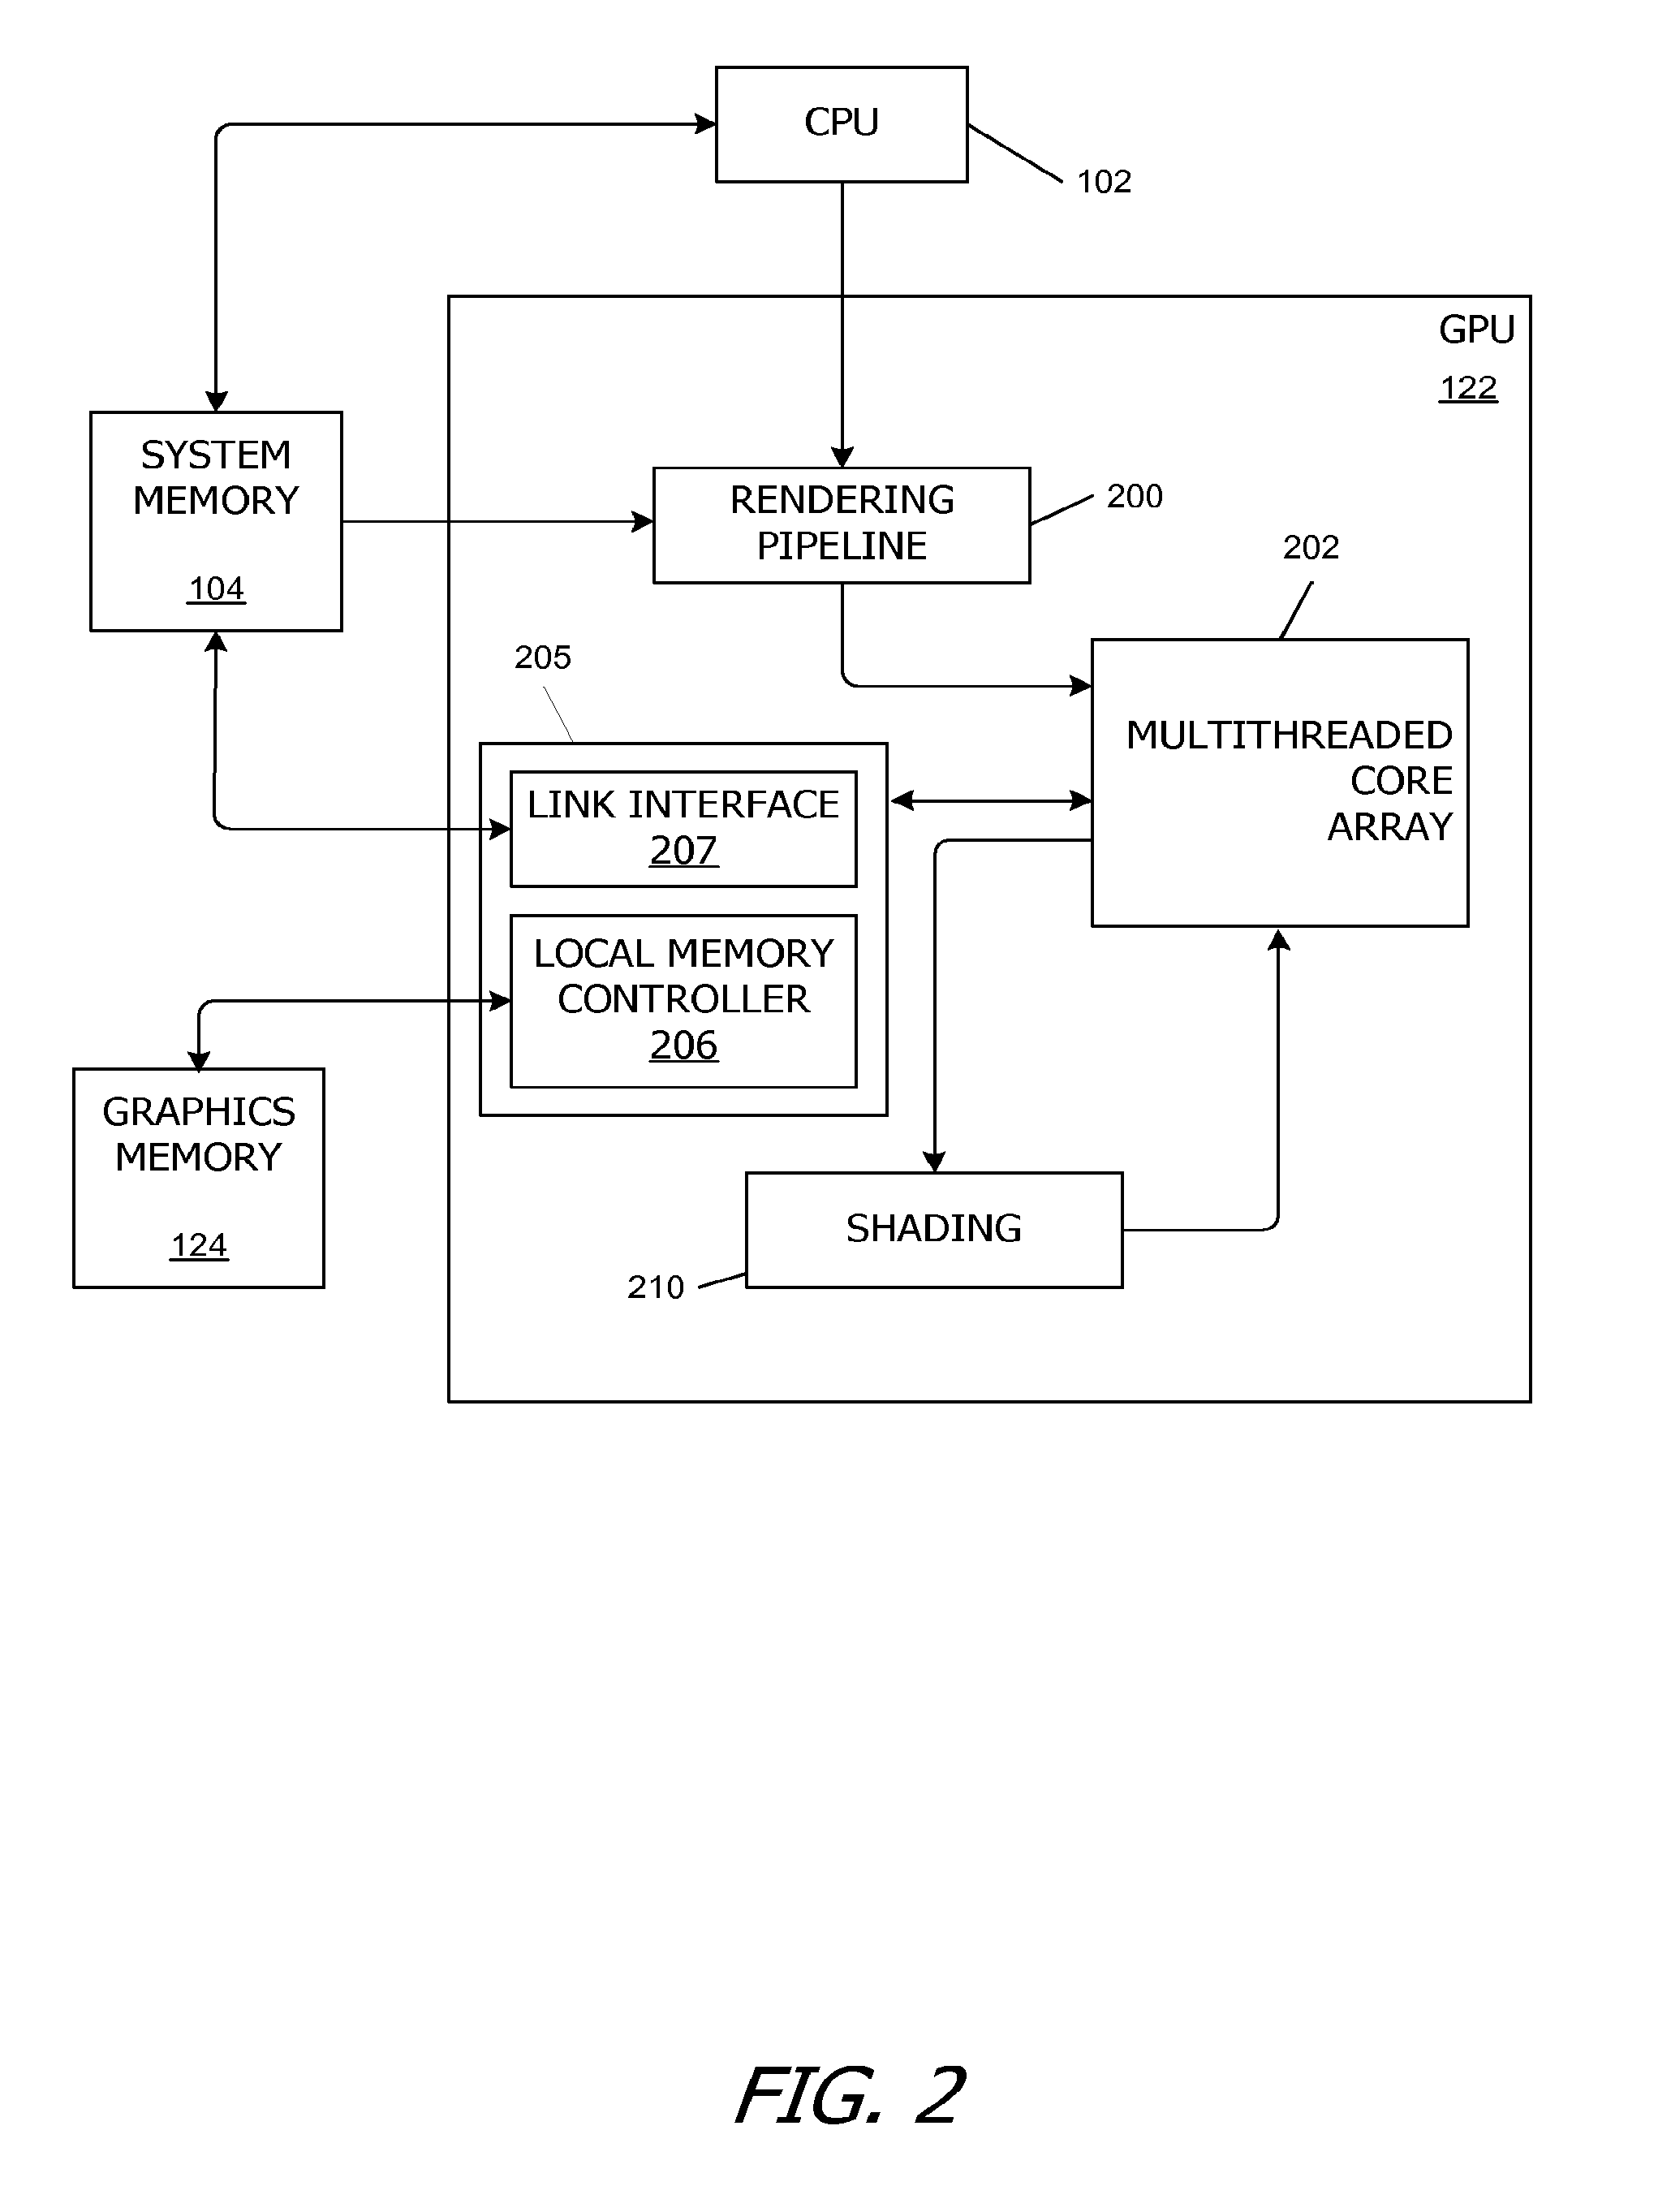 Maximized memory throughput on parallel processing devices